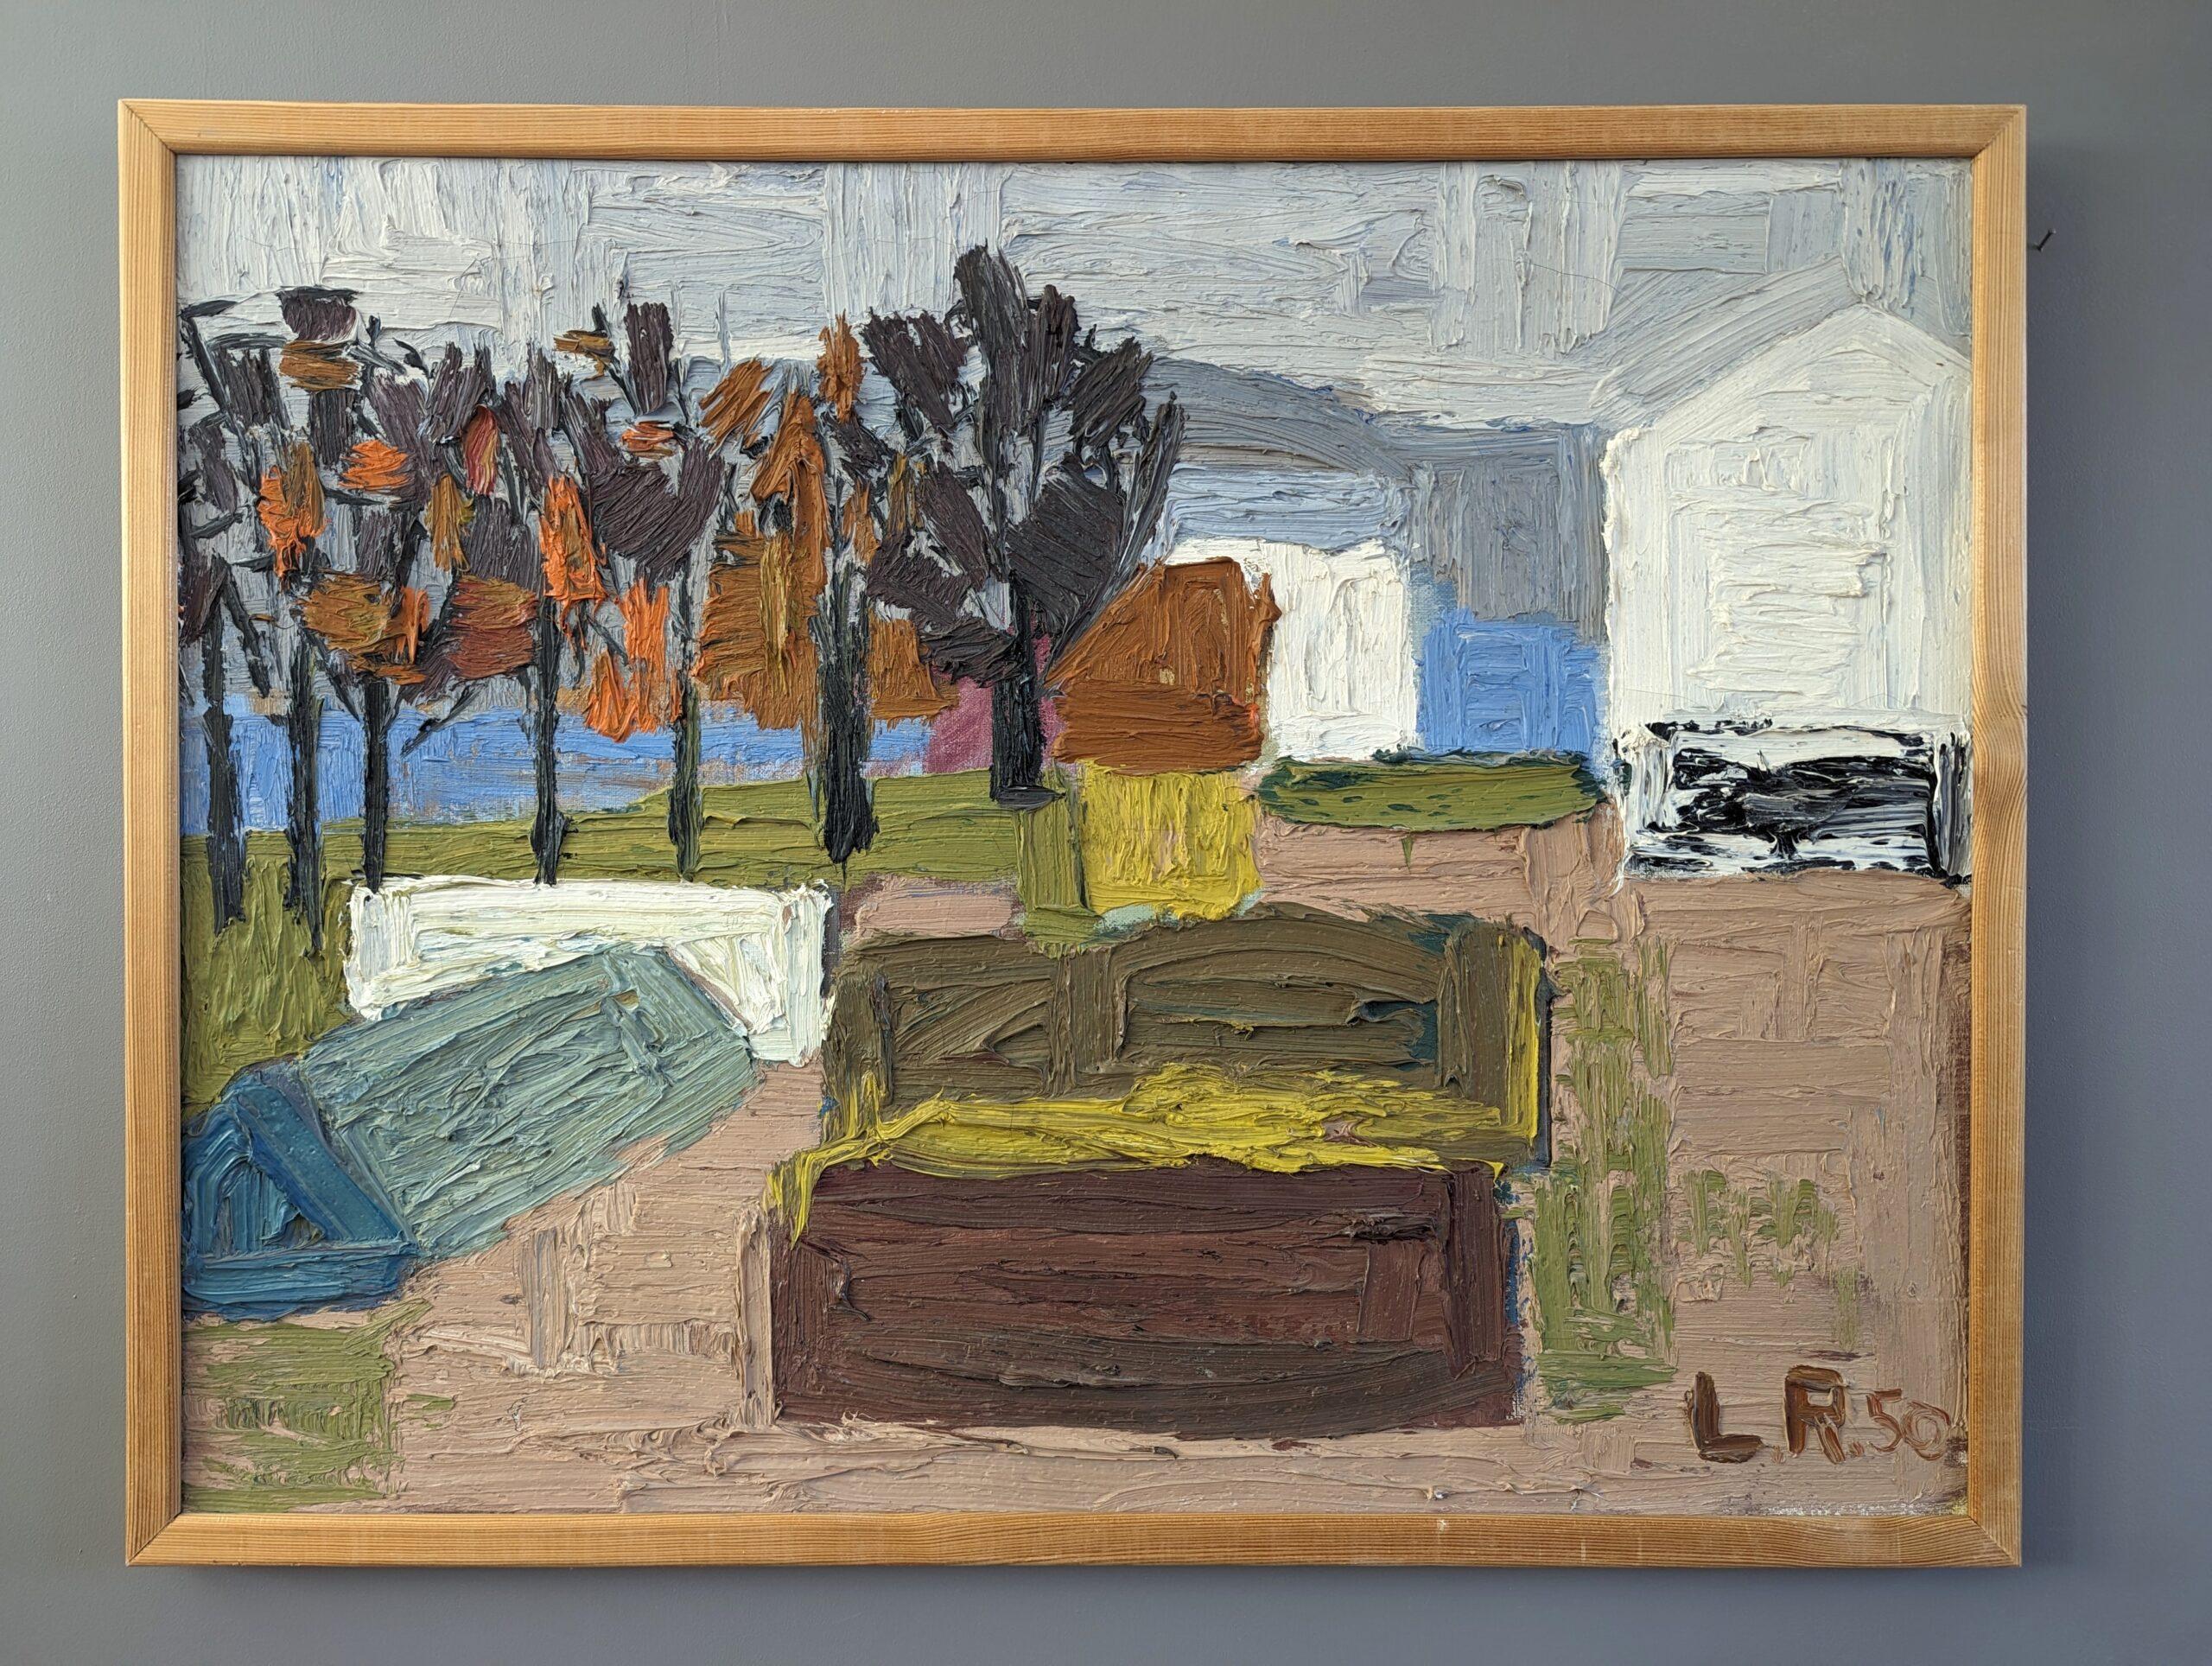 GARDEN PLOT
Size: 56.5 x 73.5 cm (including frame)
Oil on Canvas

A vibrant and richly textured mid-century composition in oil, painted onto canvas and dated 1950.

In this composition, we see a small plot of gardening land, framed by a row of trees